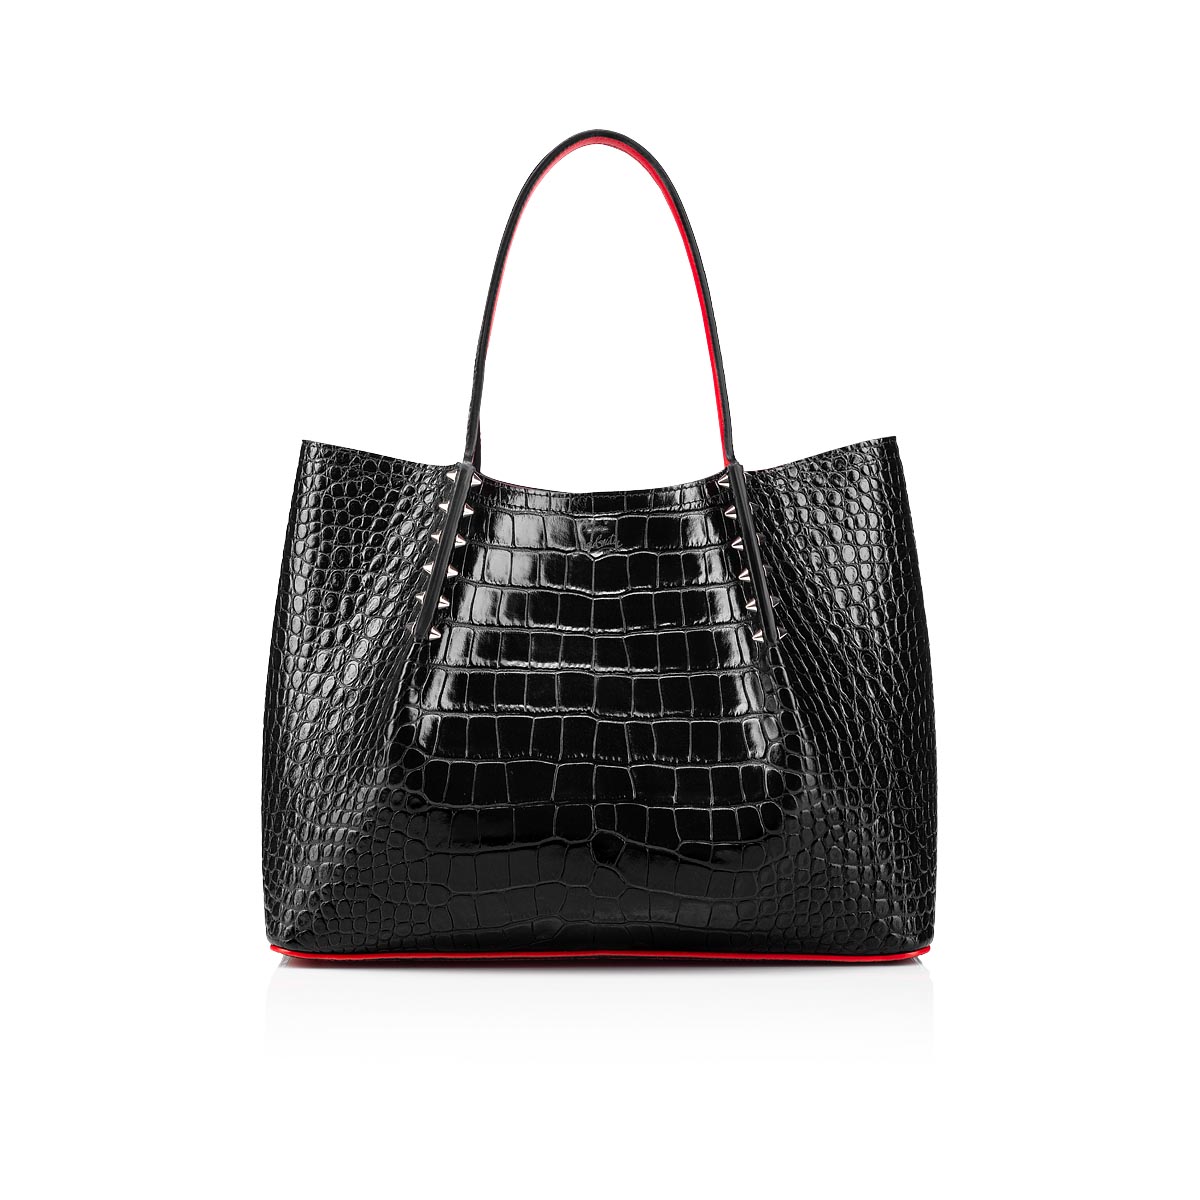 Cabarock Small Leather Tote in Black - Christian Louboutin